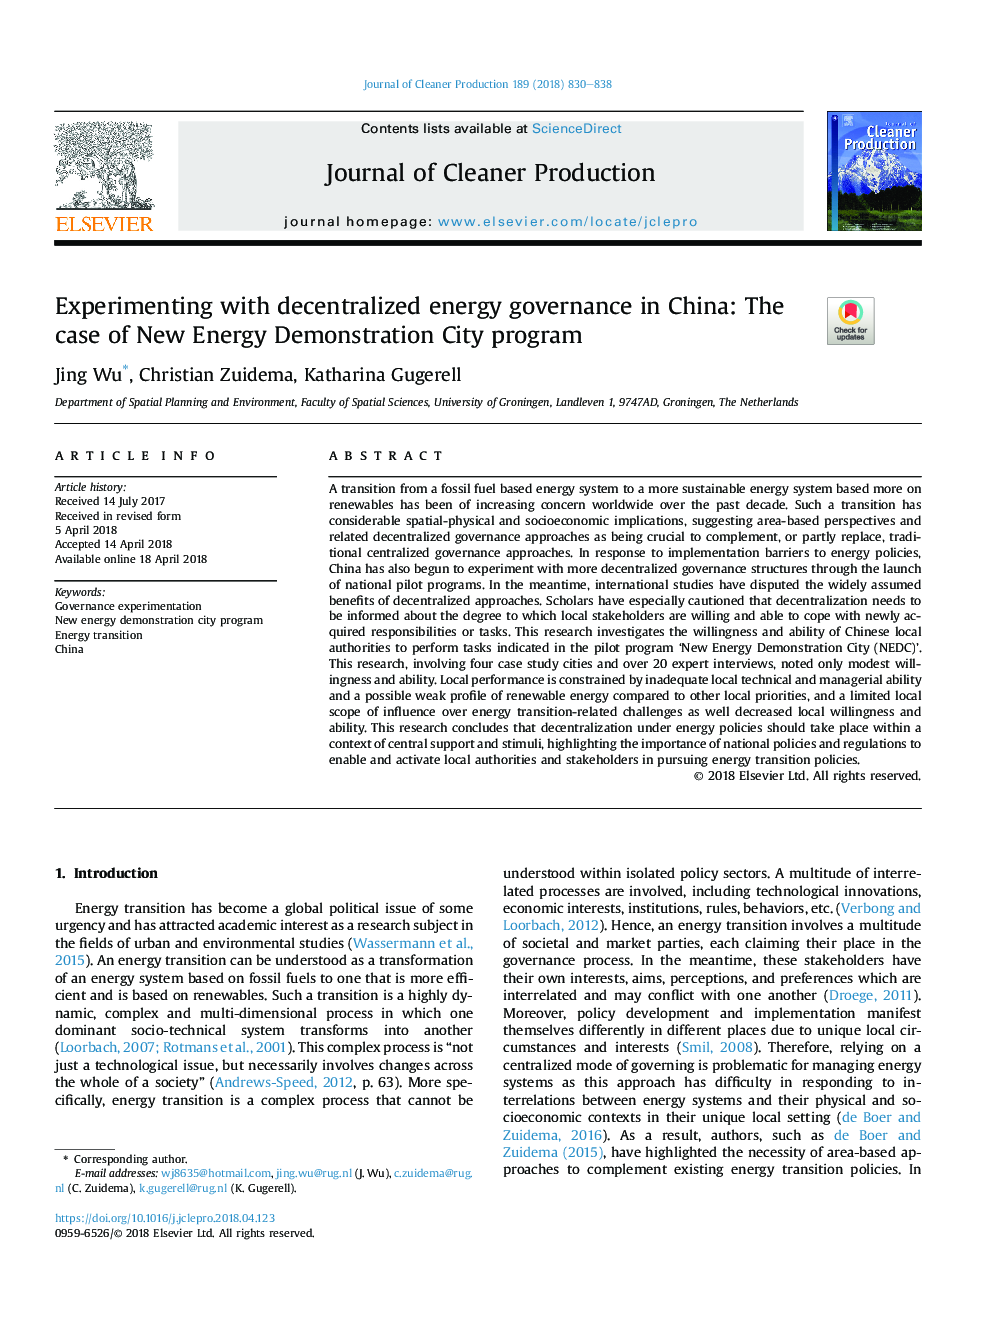 Experimenting with decentralized energy governance in China: The case of New Energy Demonstration City program